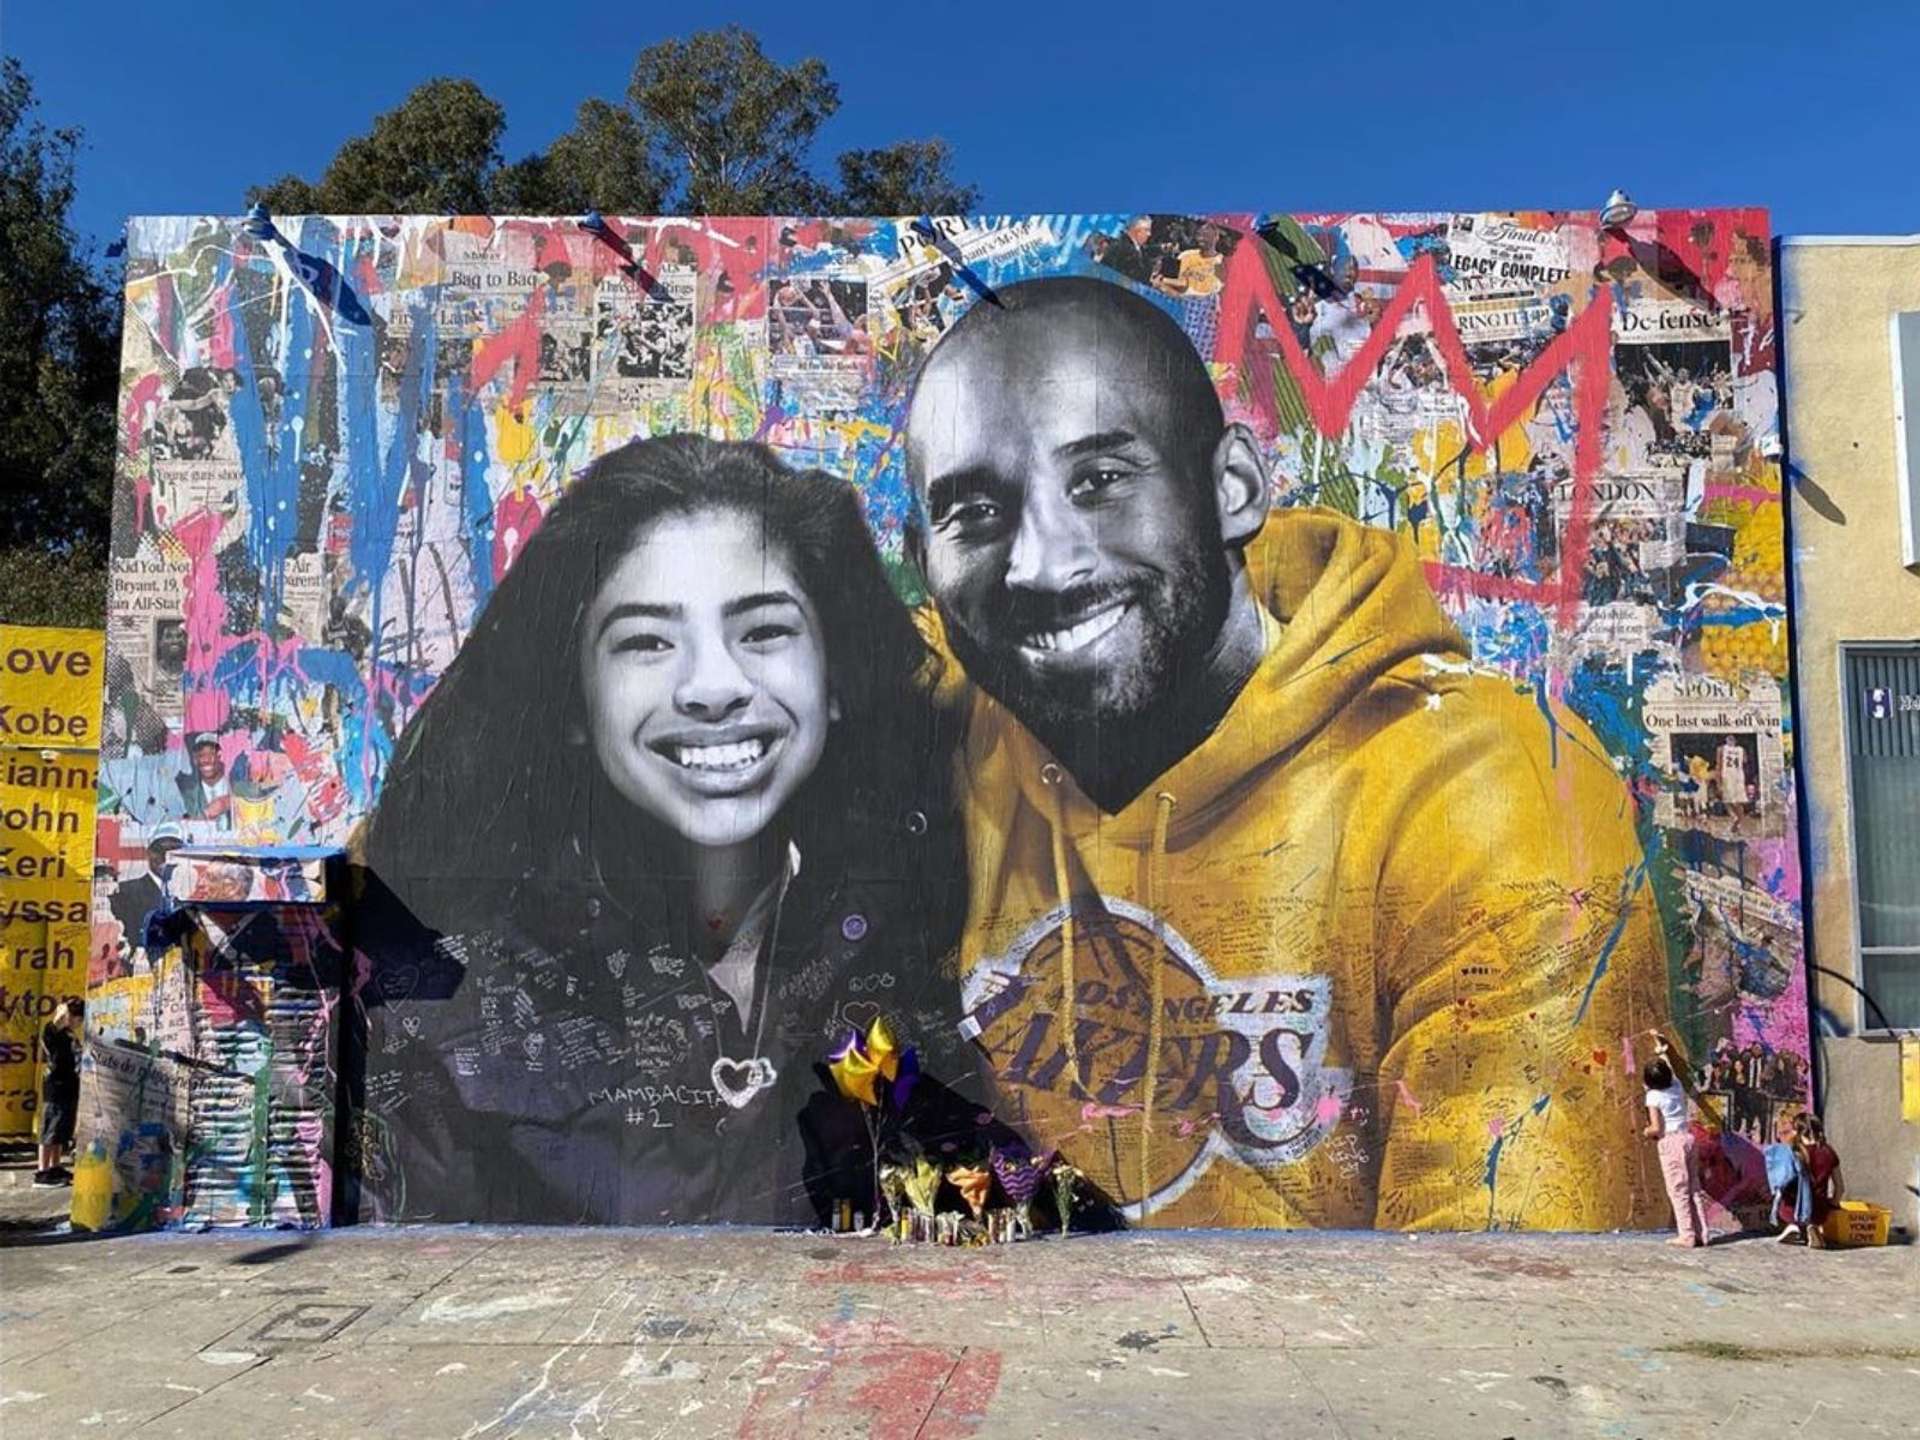 A photograph of the Kobe Bryant Mural by Mr. Brainwash, showing a monochrome image of athlete Kobe Bryant, wearing a bright yellow Los Angeles Lakers sweatshirt, and his daughter Gianna. They are posing against a background featuring a spray painted wall of several newspapers highlighting some of Kobe’s biggest achievements. In the corner behind Kobe is one of Basquiat’s crowns.